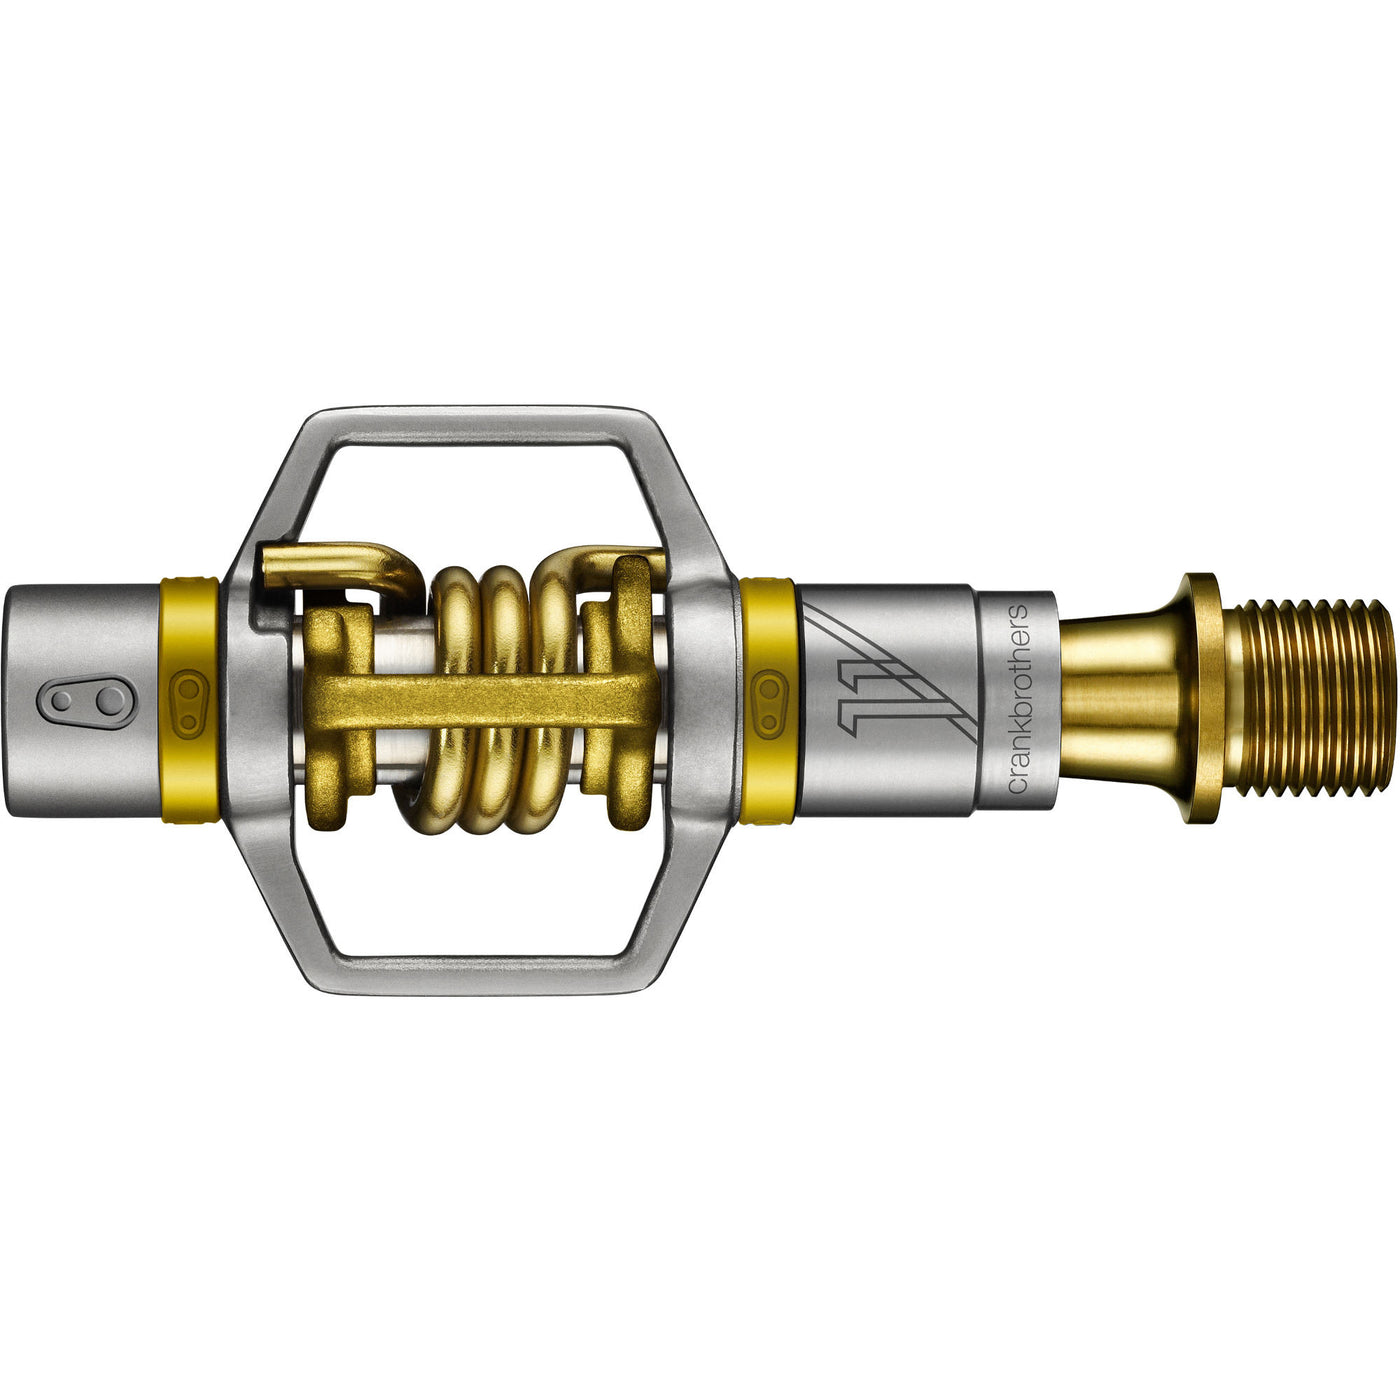 CRANKBROTHERS Eggbeater 11 Pedals